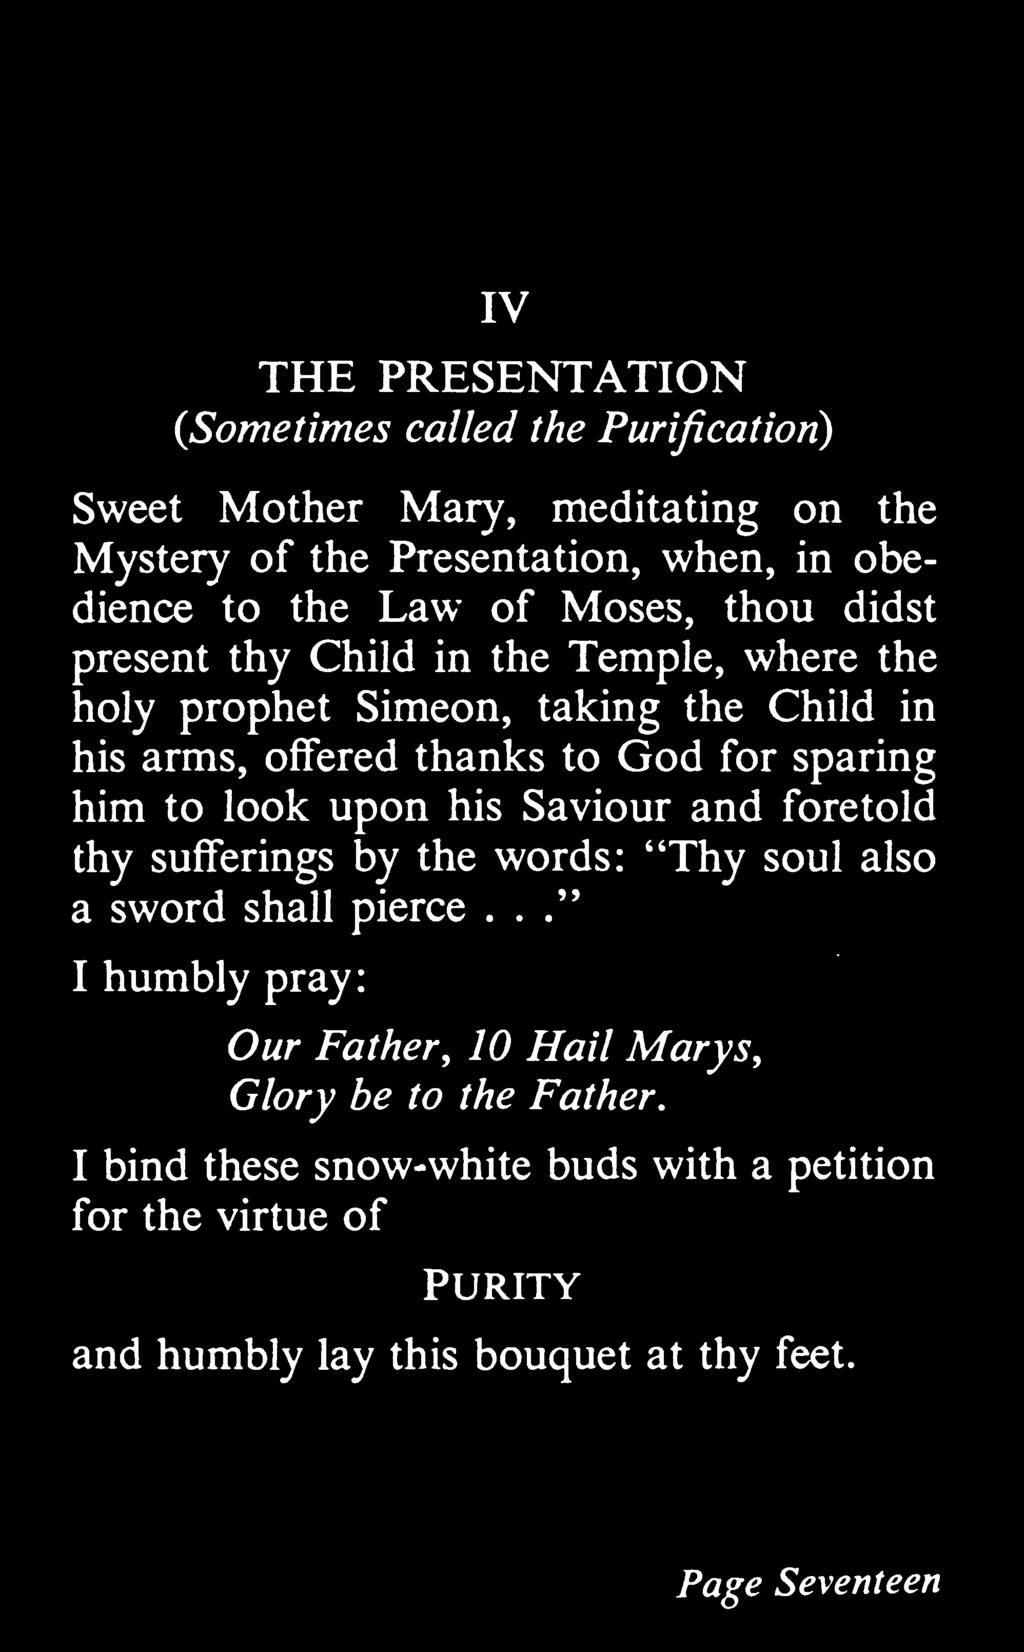 IV THE PRESENTATION {Sometimes called the Purification) Sweet Mother Mary, meditating on the Mystery of the Presentation, when, in obedience to the Law of Moses, thou didst present thy Child in the